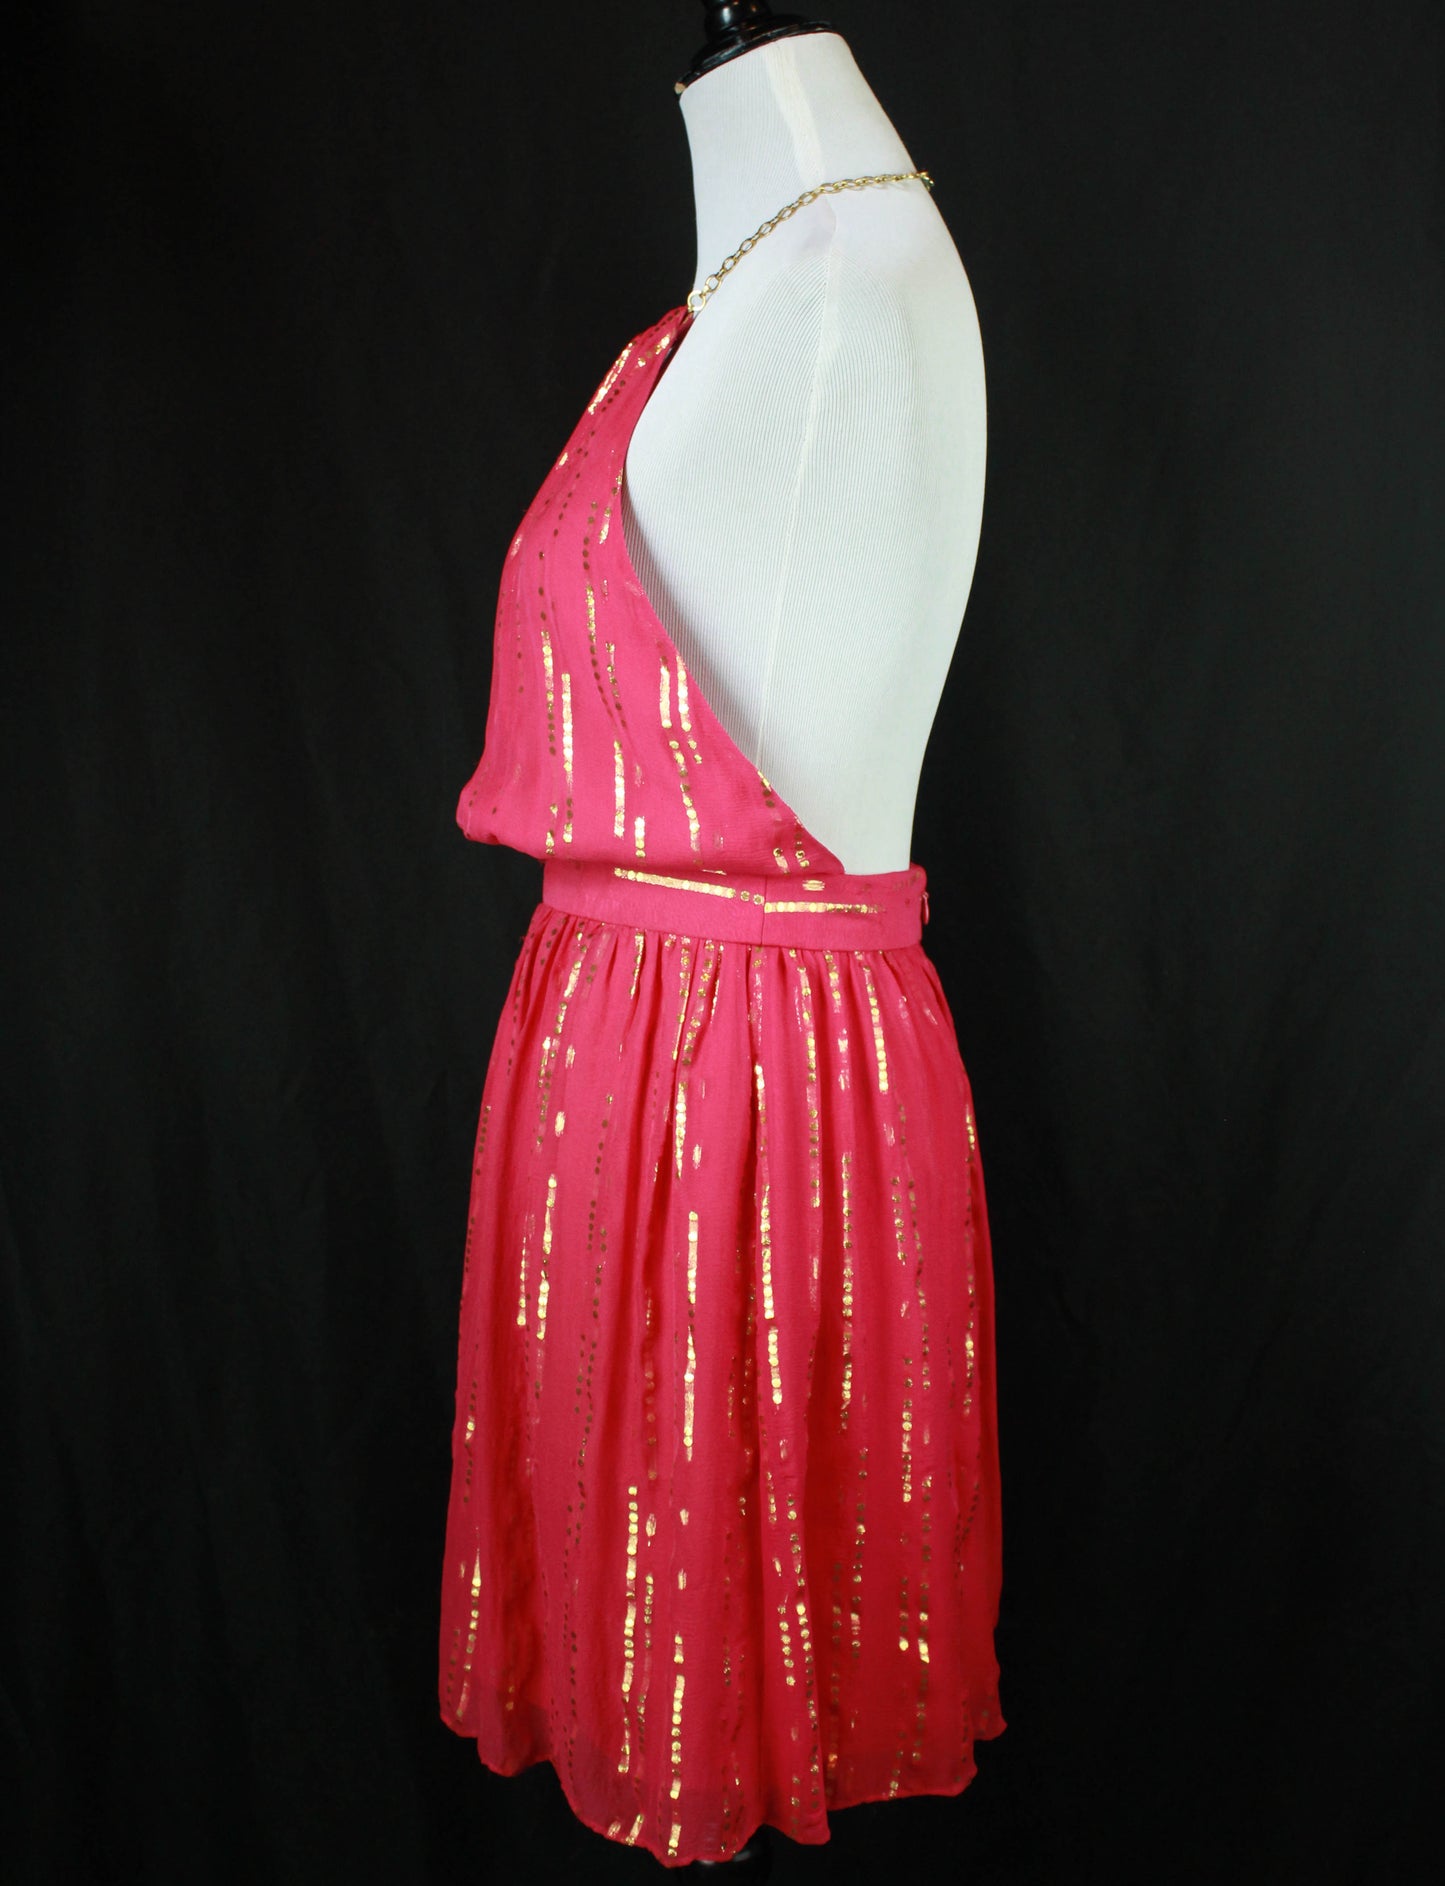 Women's Vintage 80's Fuchsia And Gold Halter Chain Dress - Small